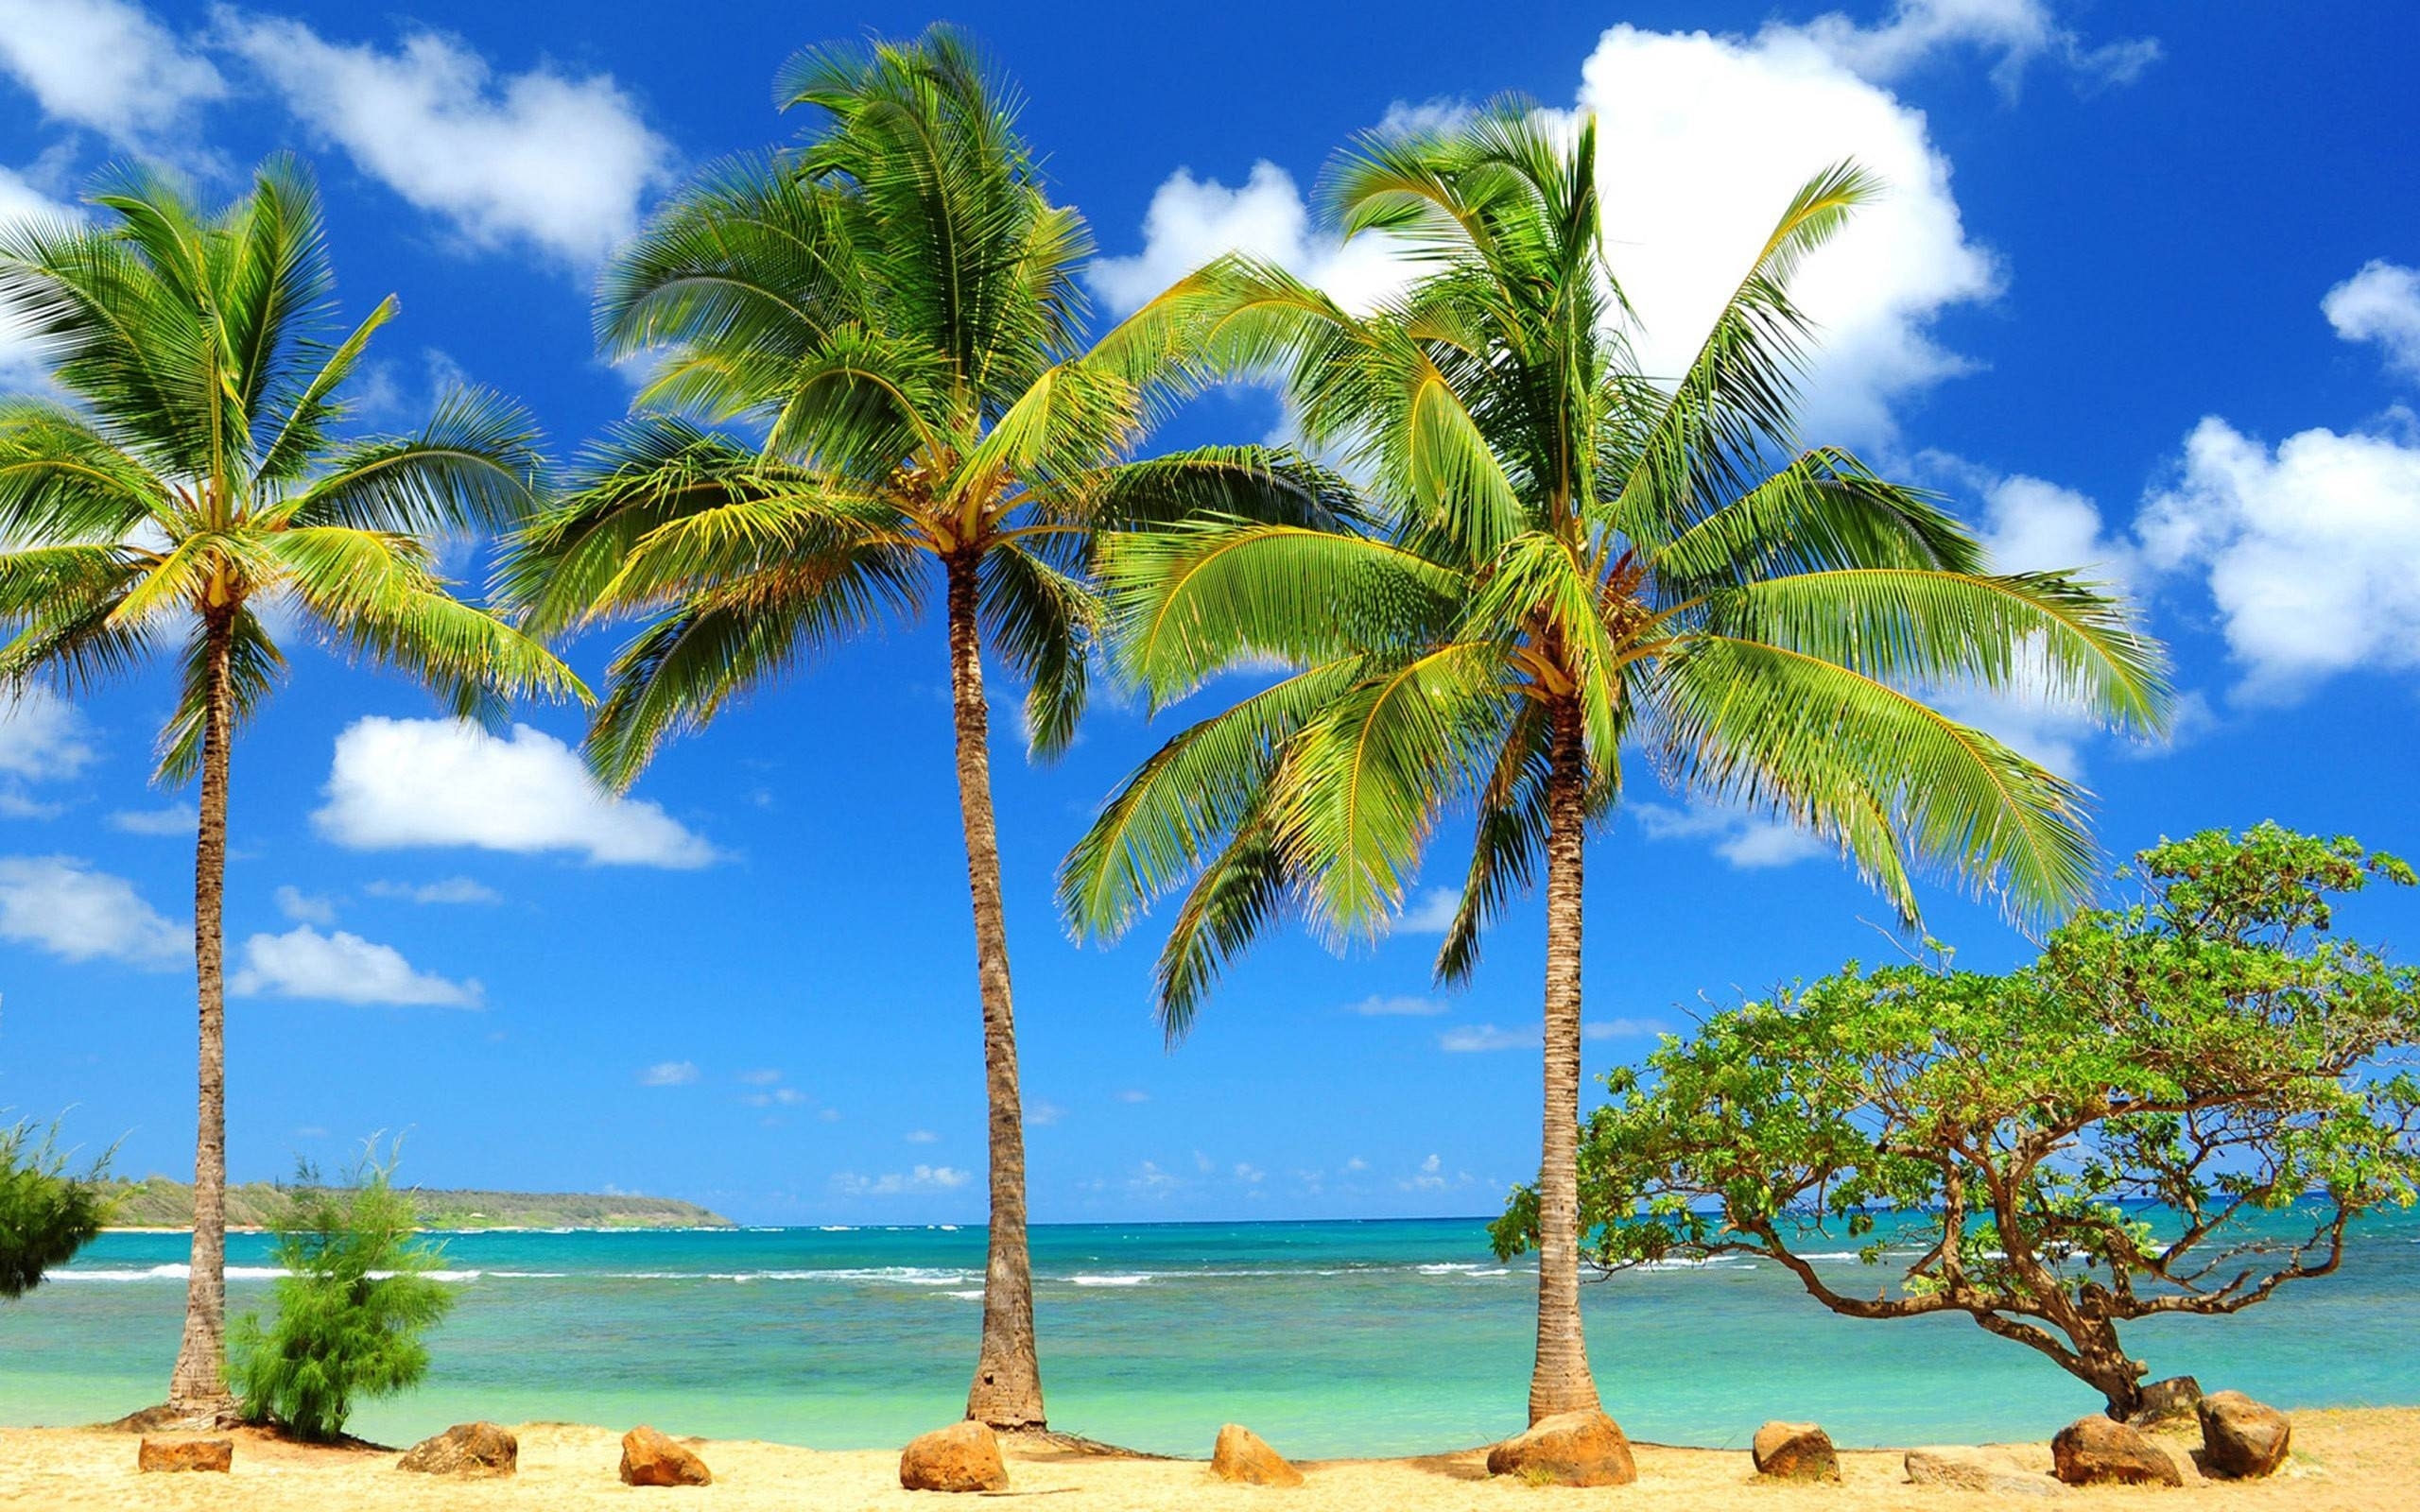 10 Best Palm Trees Wallpaper Hd FULL HD 1080p For PC Background